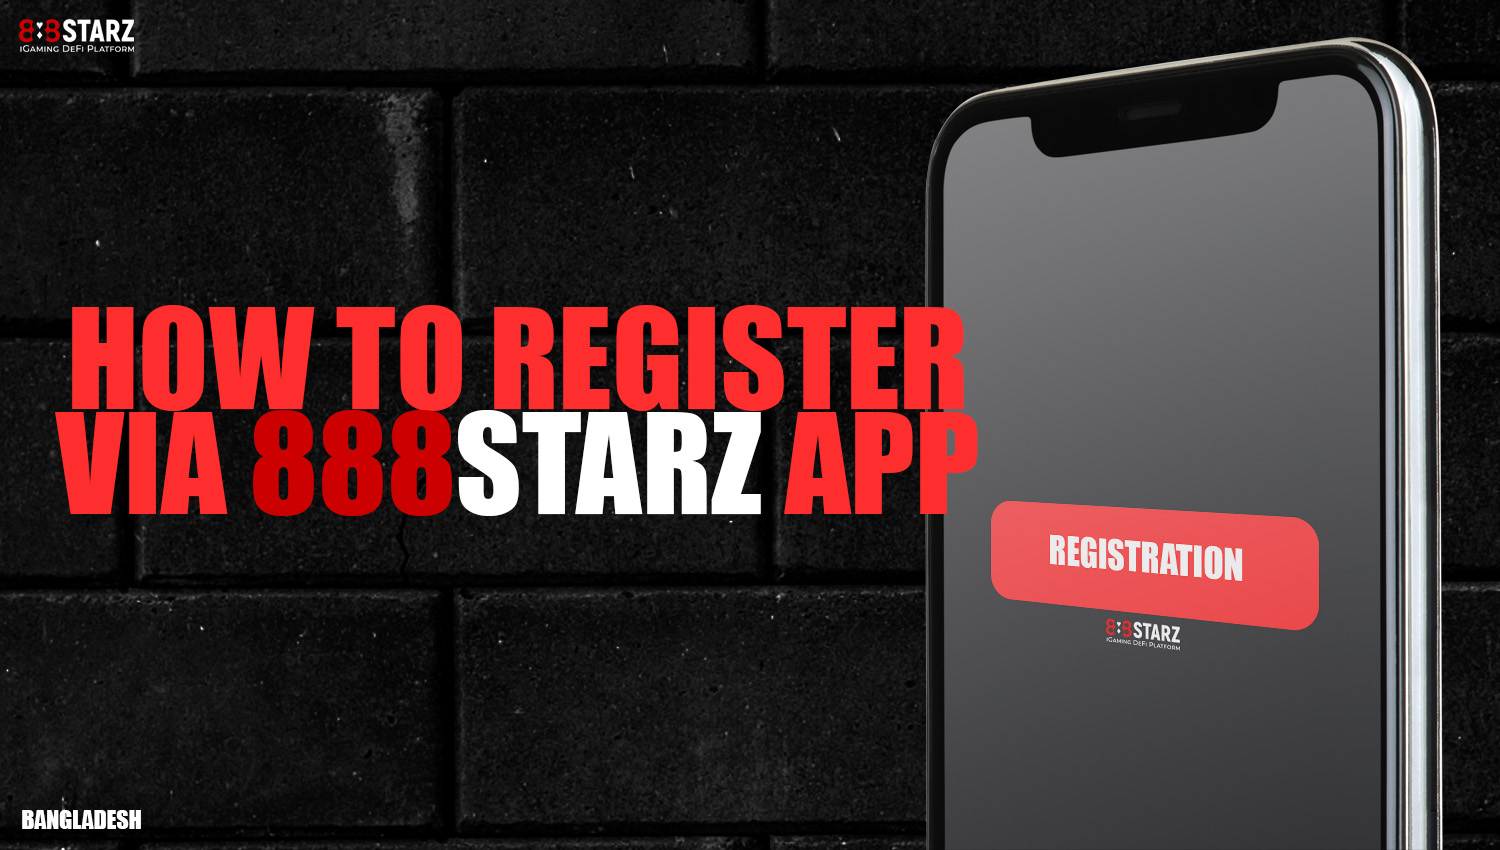 Simple steps to help you sign up with 888starz through the mobile app